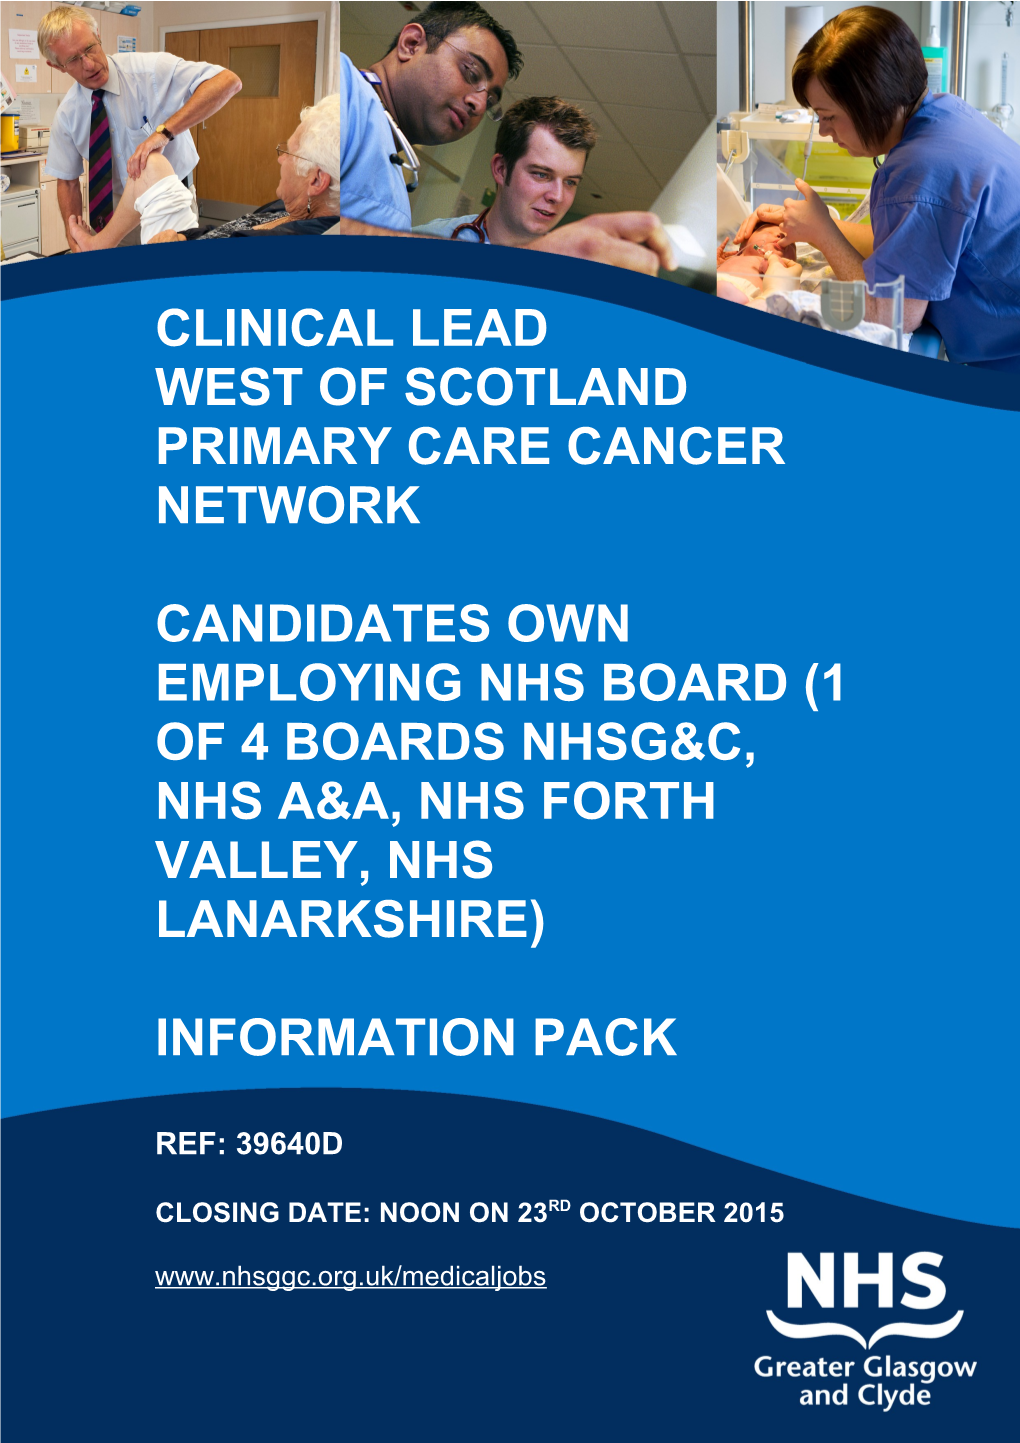 West of Scotland Primary Care Cancer Network